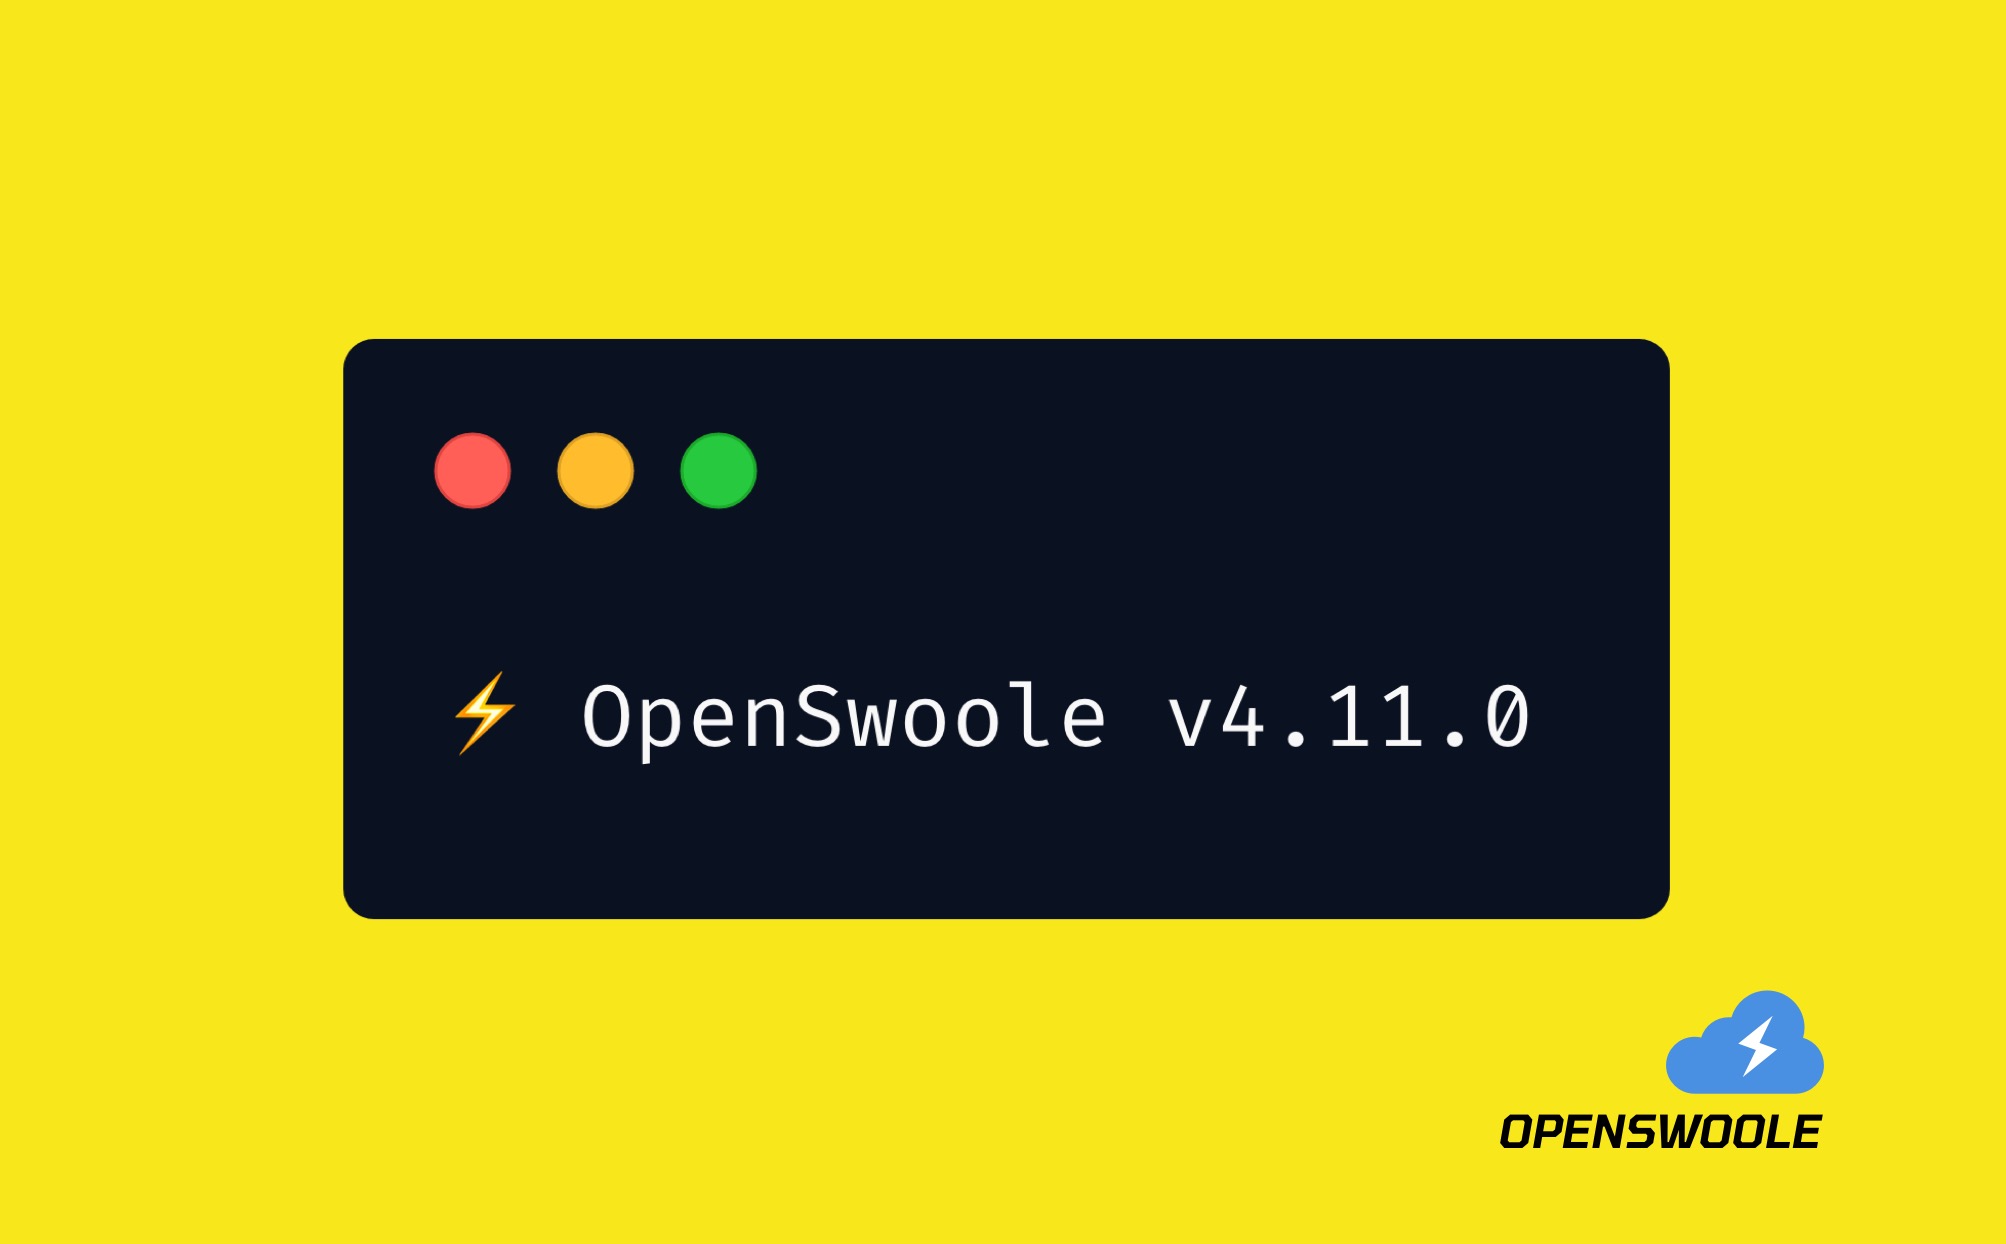 Open Swoole 4.11.0 released with HTTP2 improvements, PHP GRPC server, bug fixes and more